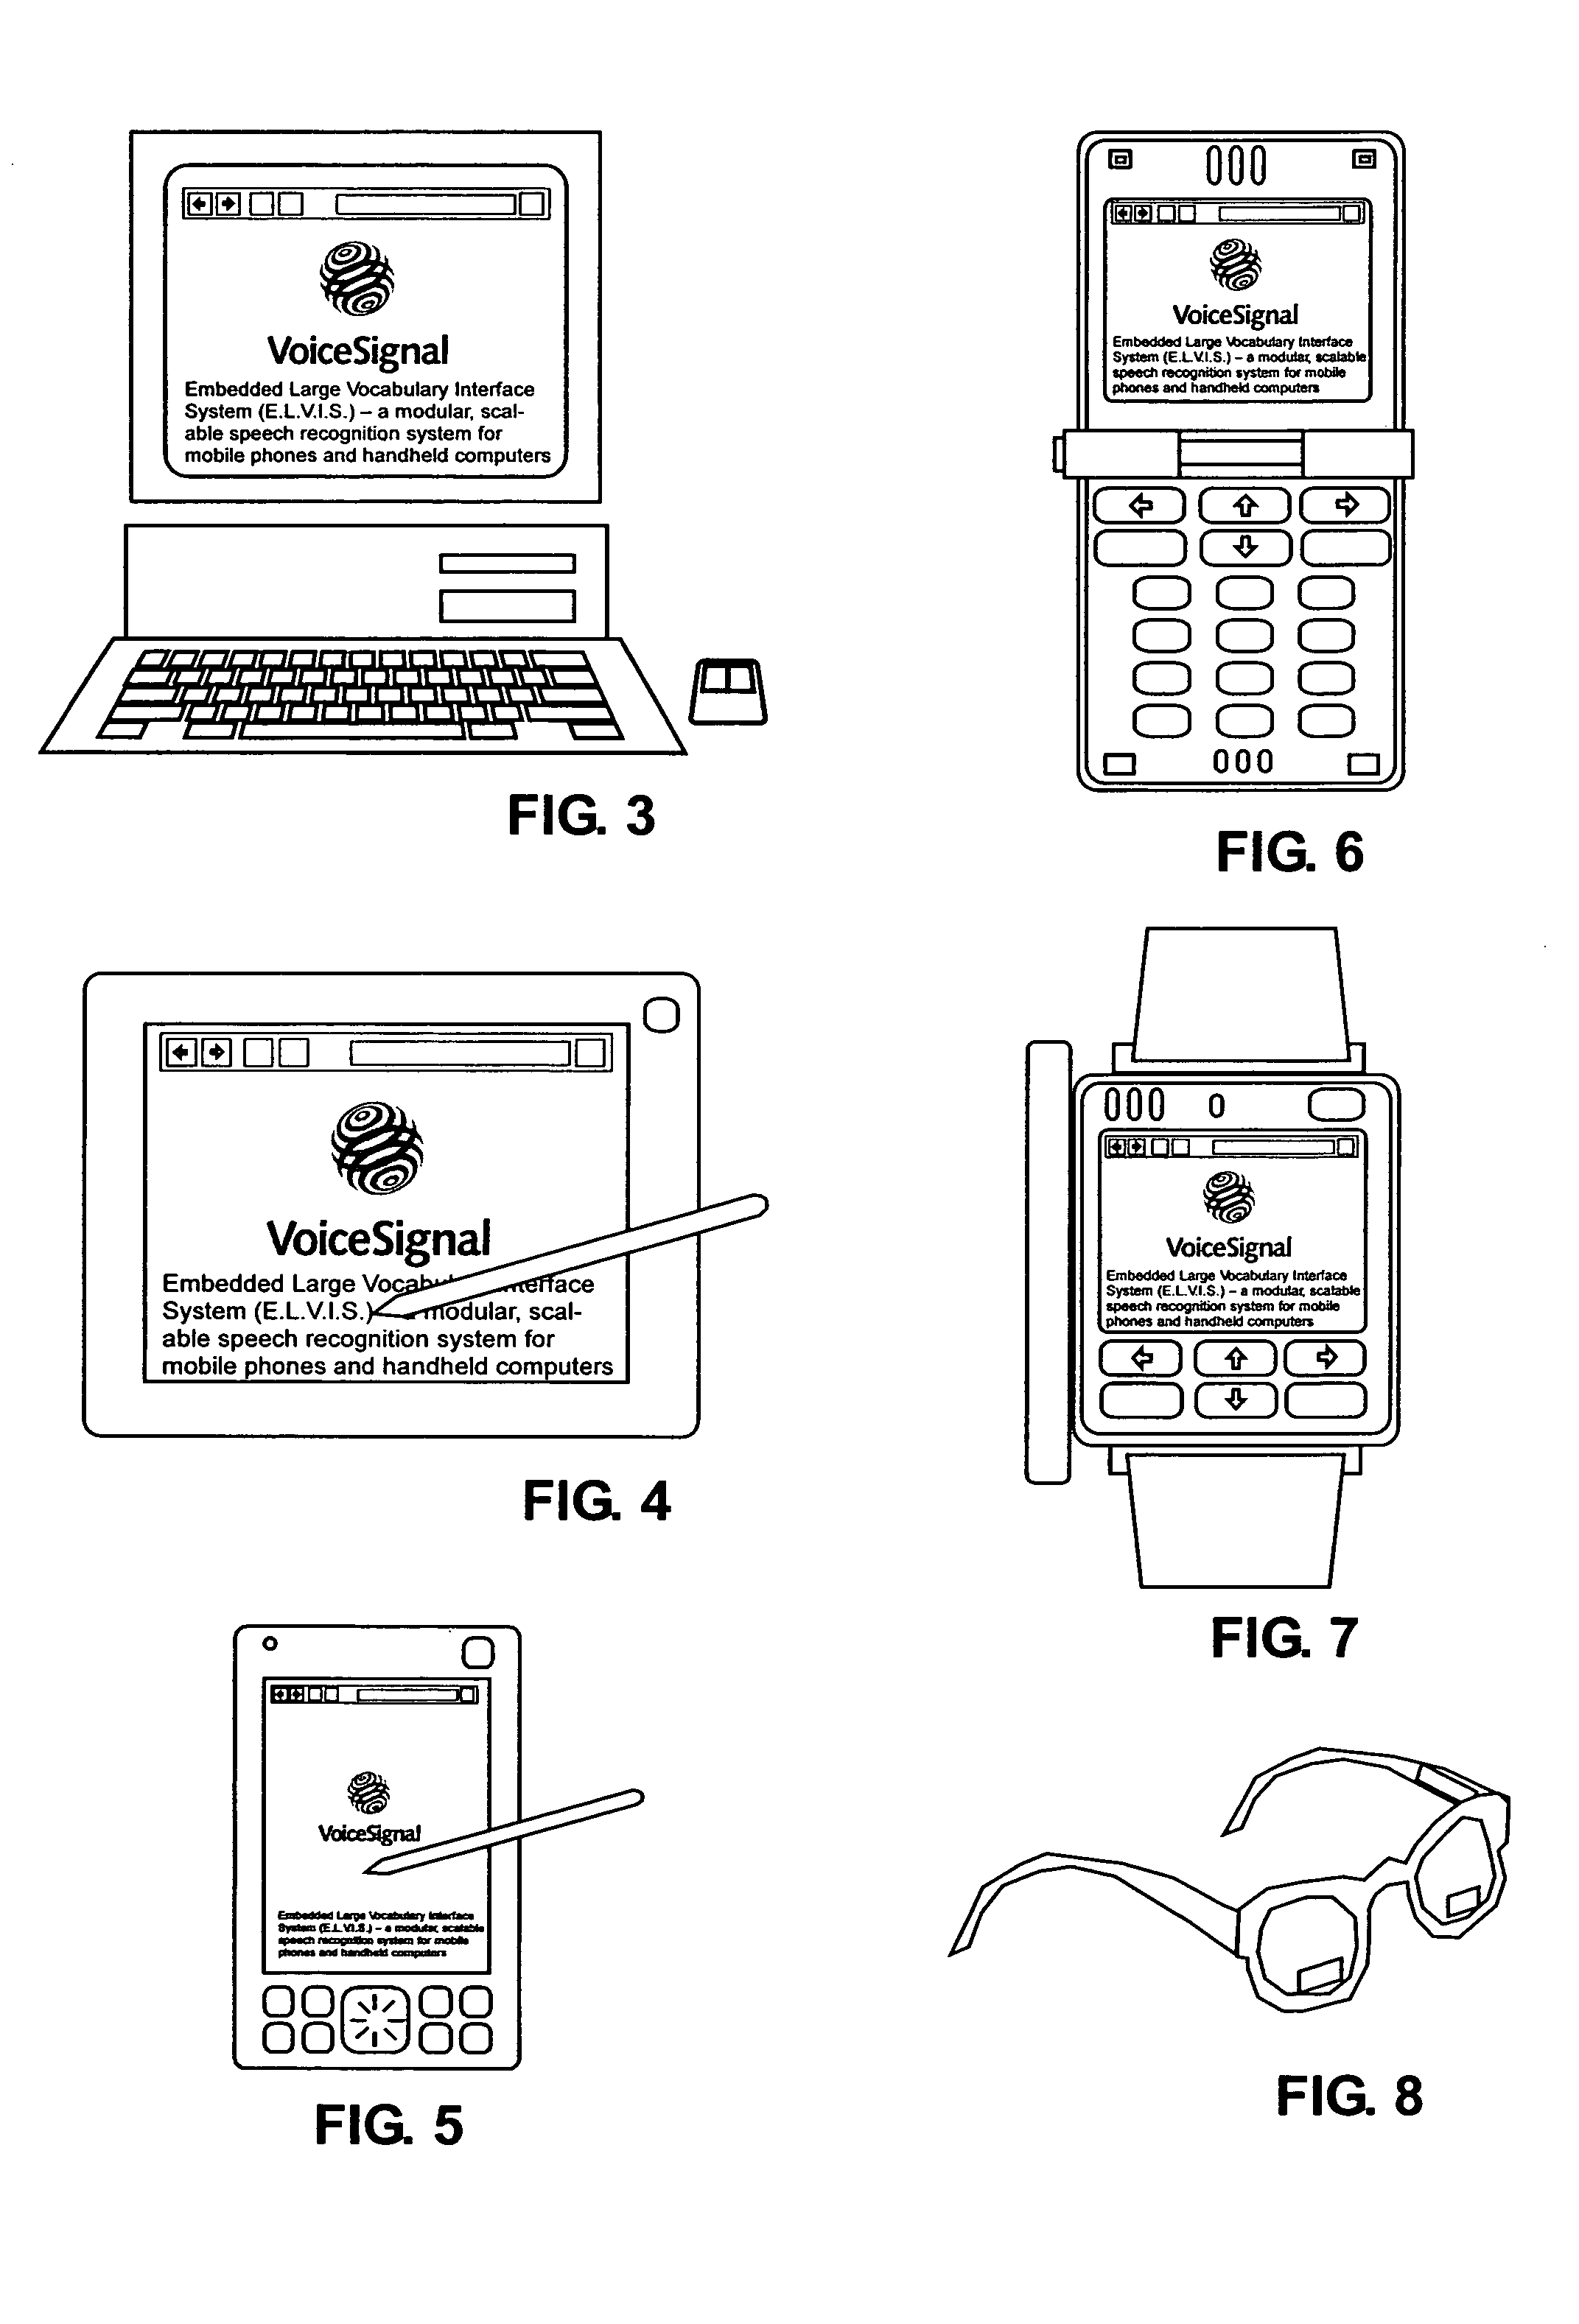 Speech recognition using ambiguous or phone key spelling and/or filtering